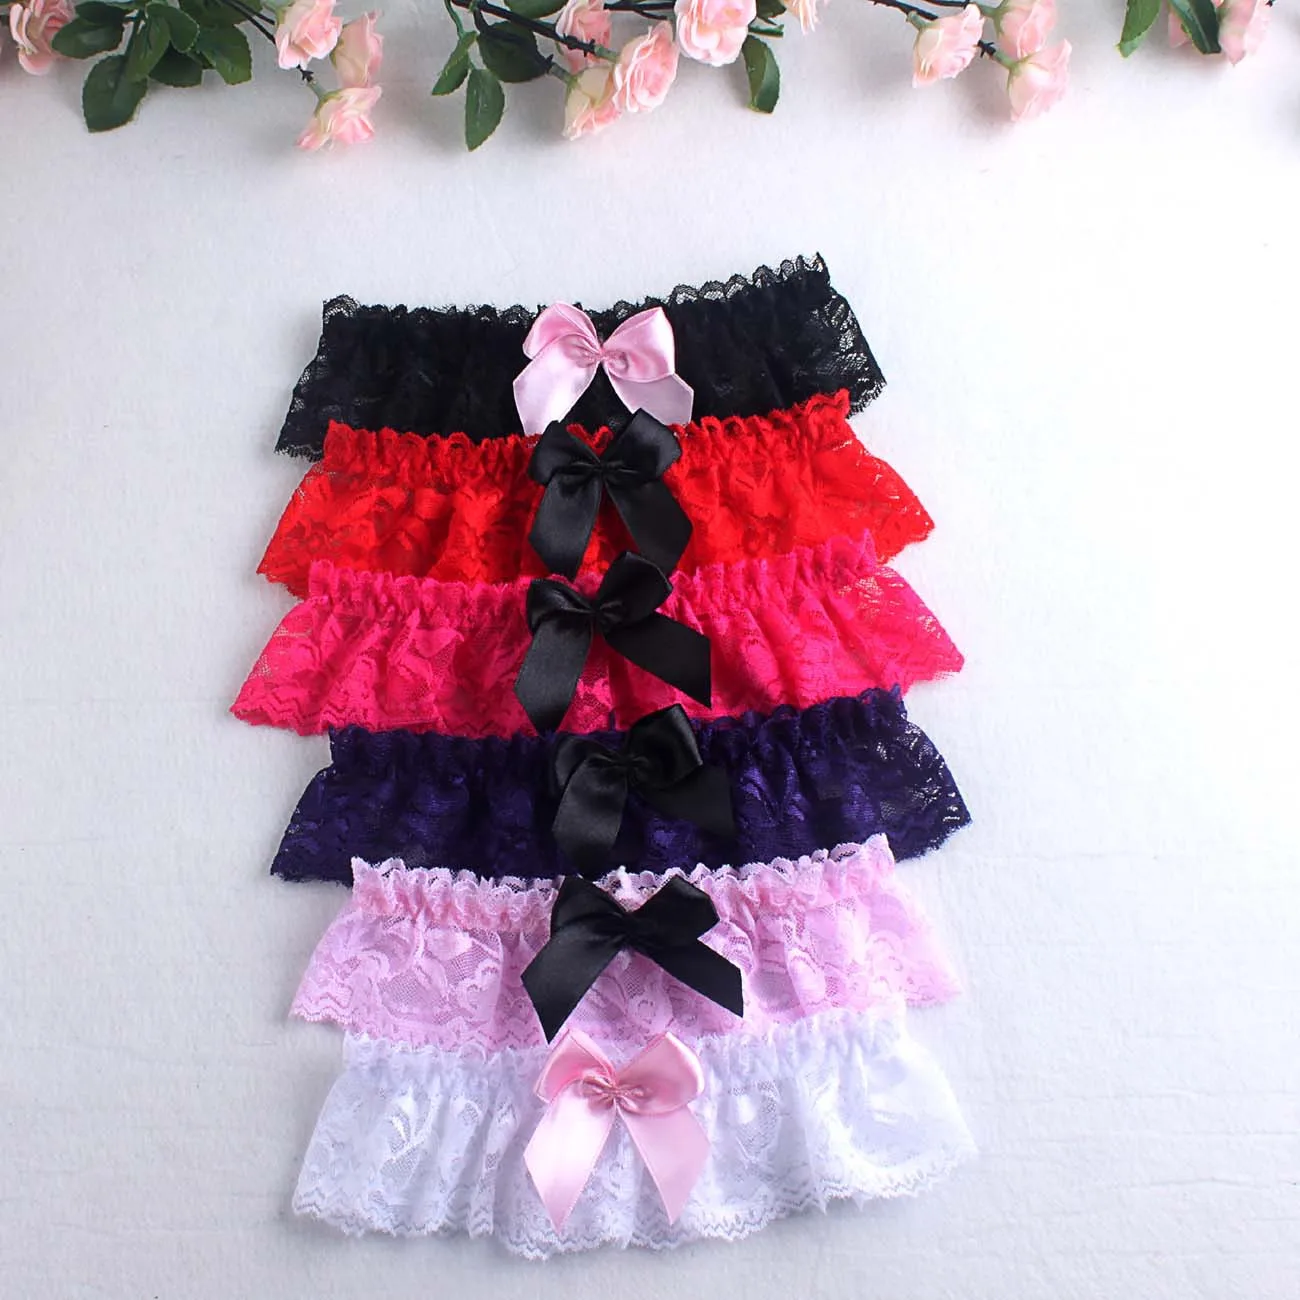 1Pcs Women Girls Sexy Lace Floral Bridal Lingerie Bowknot Wedding Party Cosplay Leg Garter Belt Suspender Thigh Ring Black/White